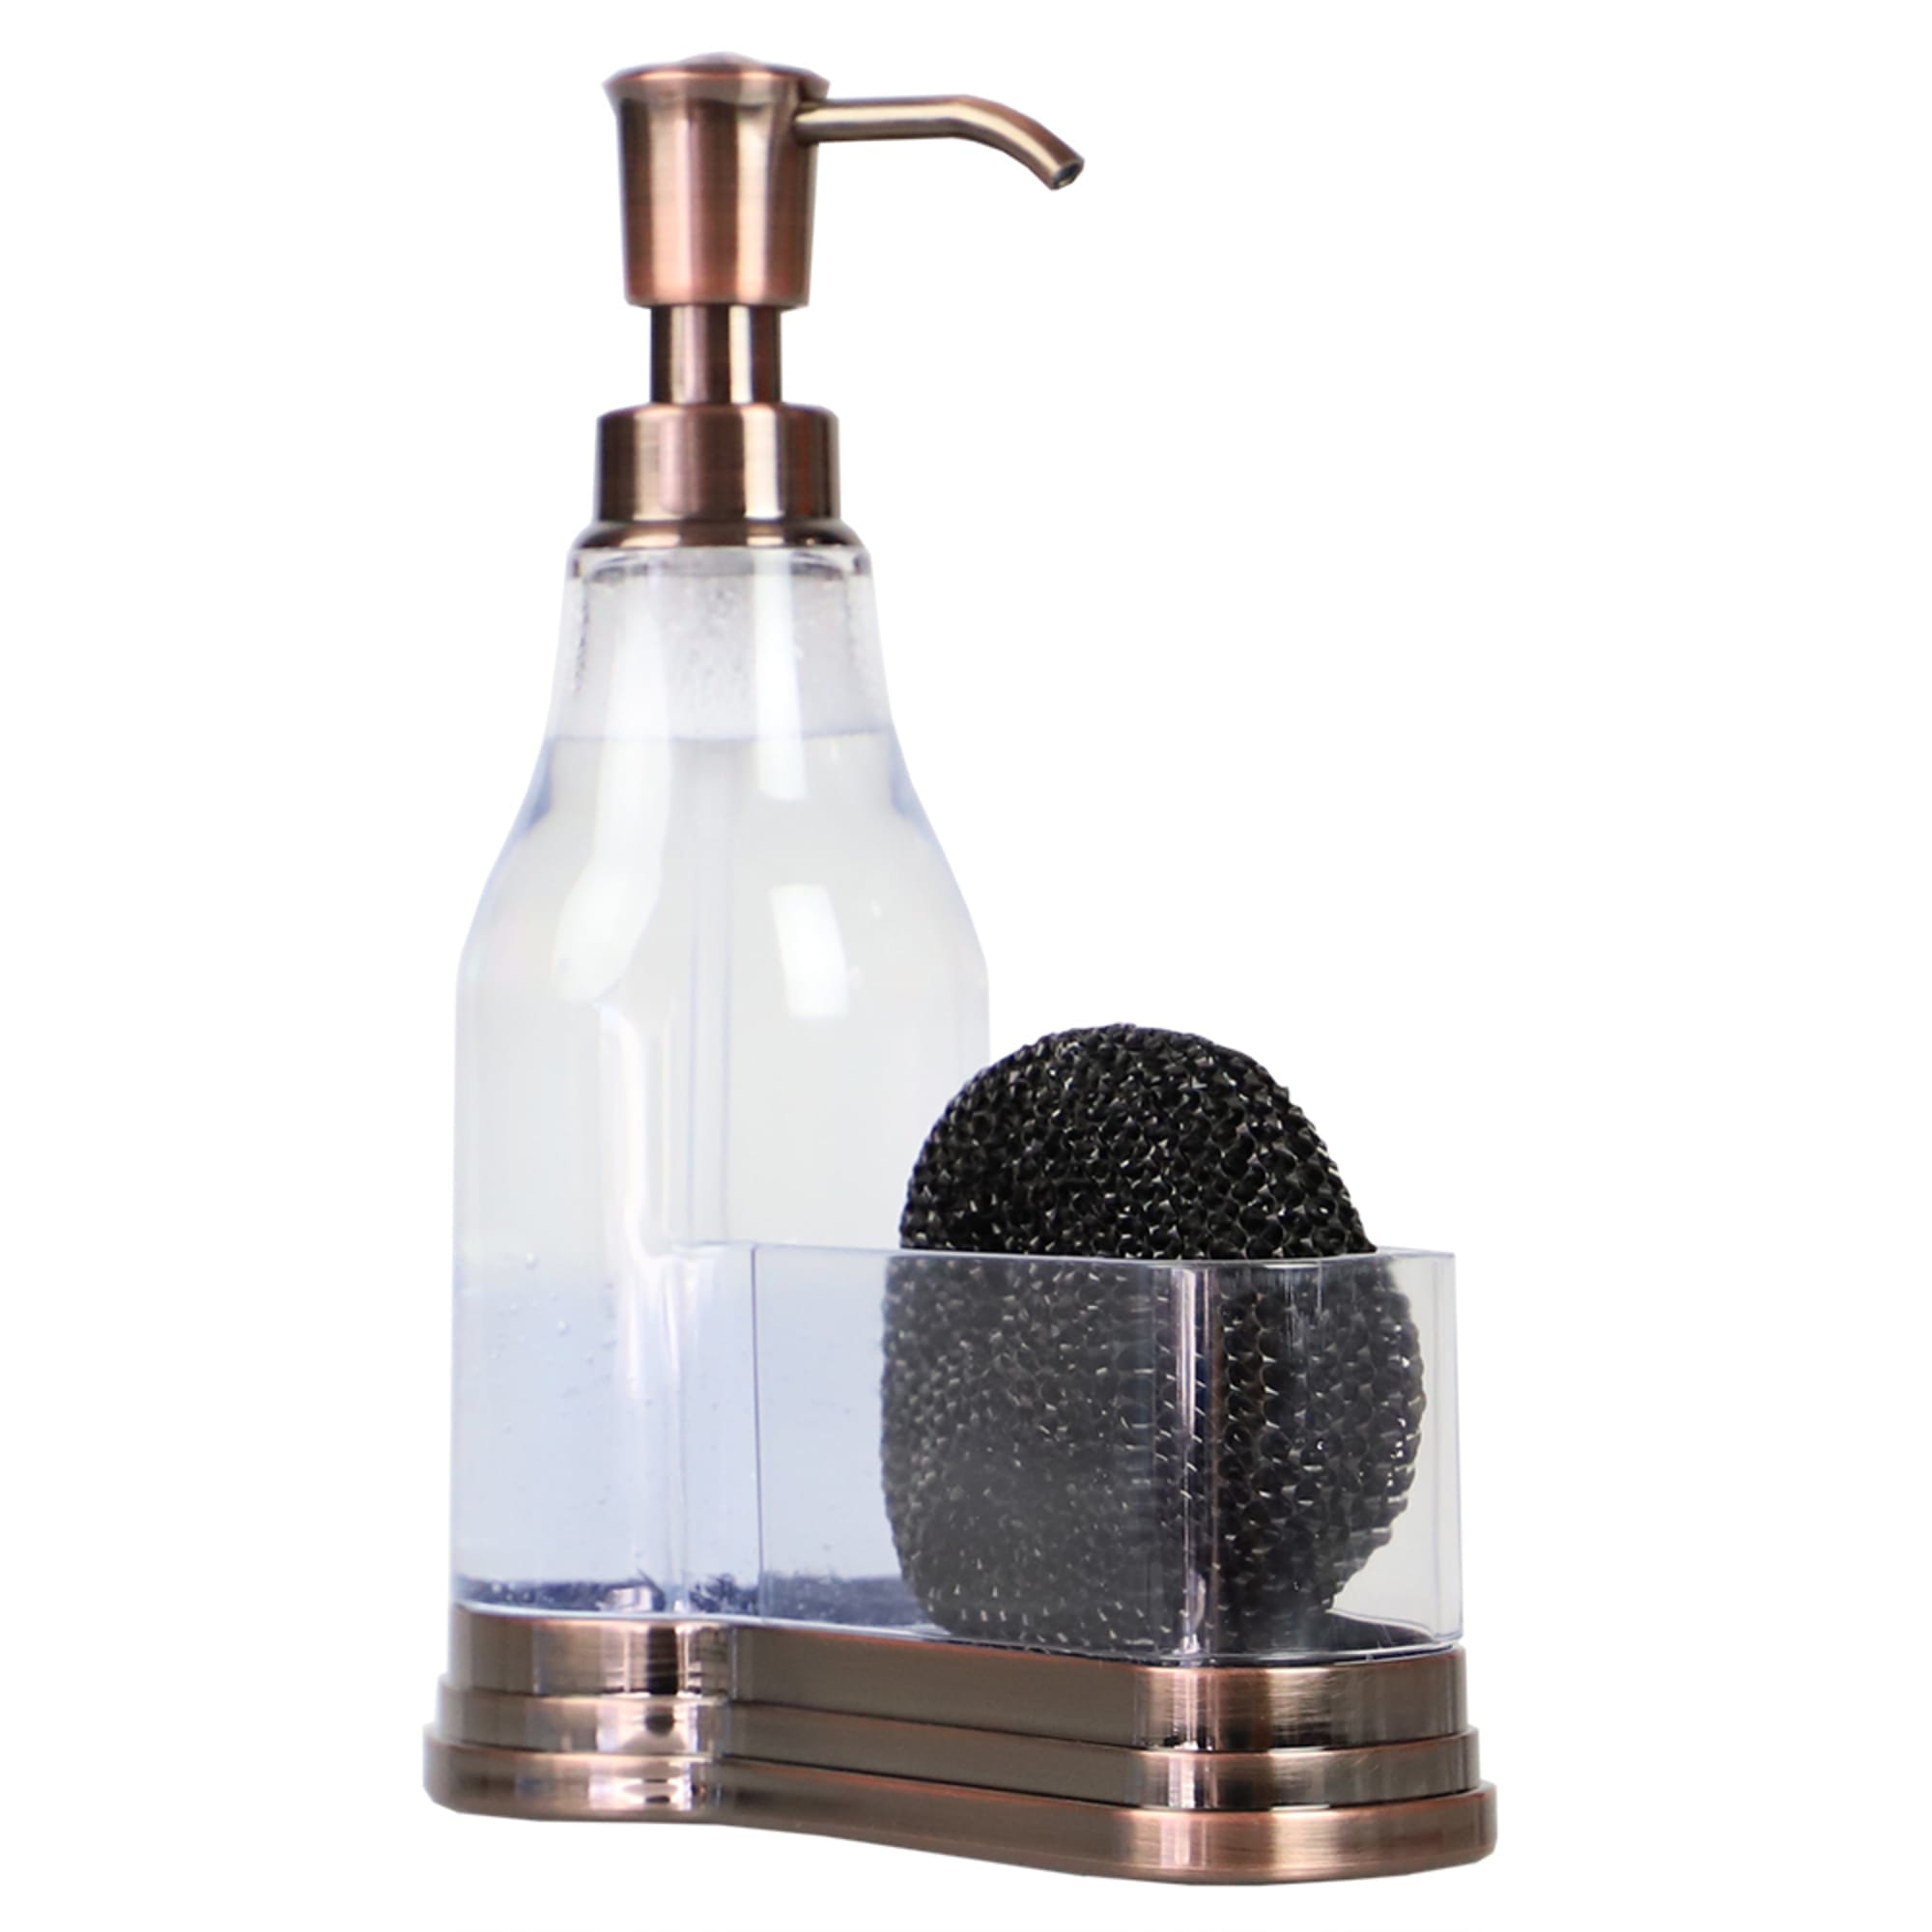 Home Basics Plastic Soap Dispenser with Brushed Steel Top  and Fixed Sponge Holder, Bronze $6.00 EACH, CASE PACK OF 12